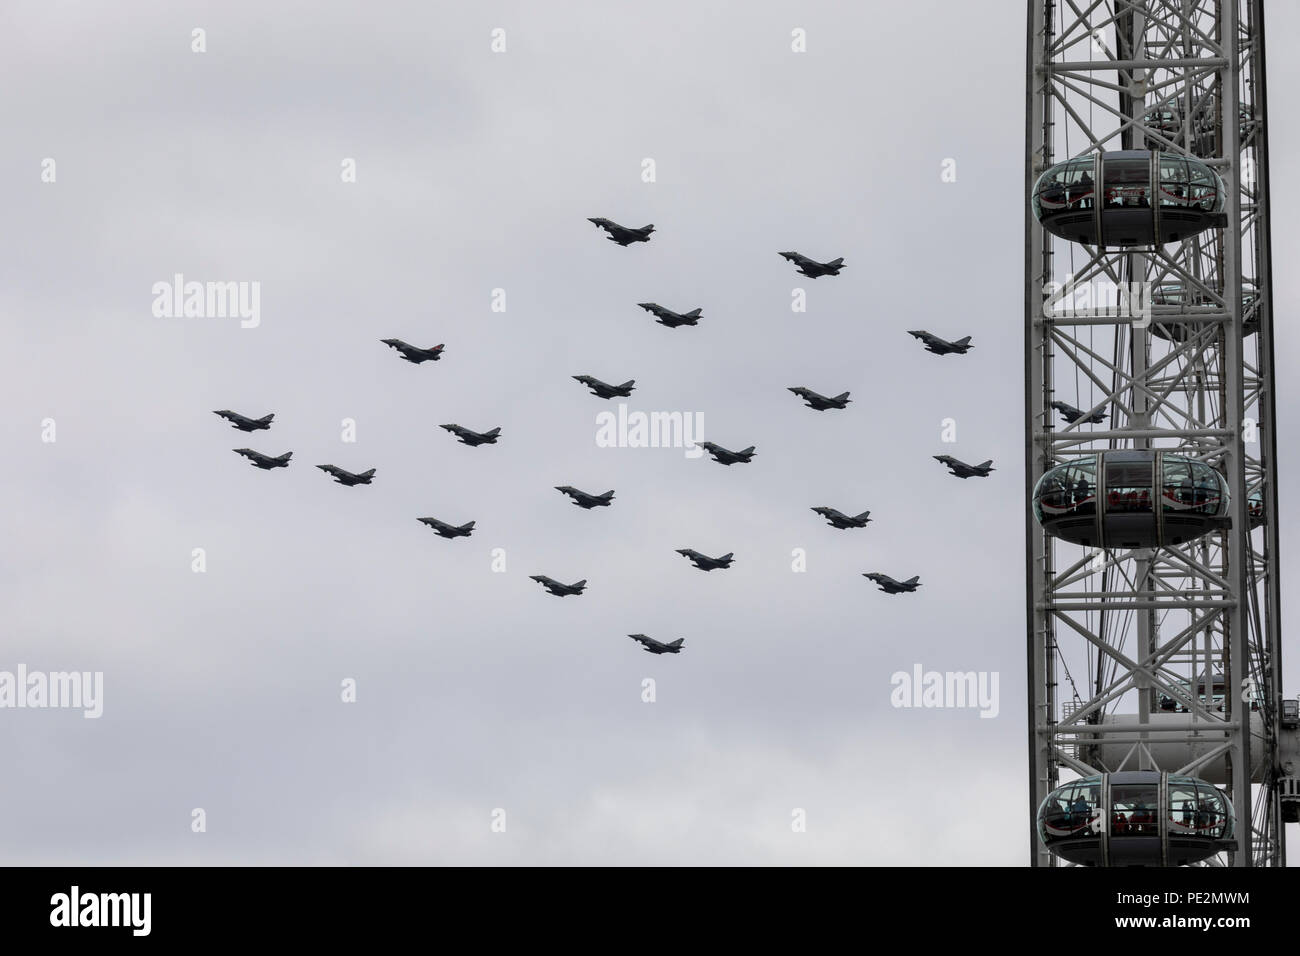 Many Eurofight Typhoon RAF fighter jets in formation over London for the RAF100 anniversary flypast passing the London Eye Stock Photo